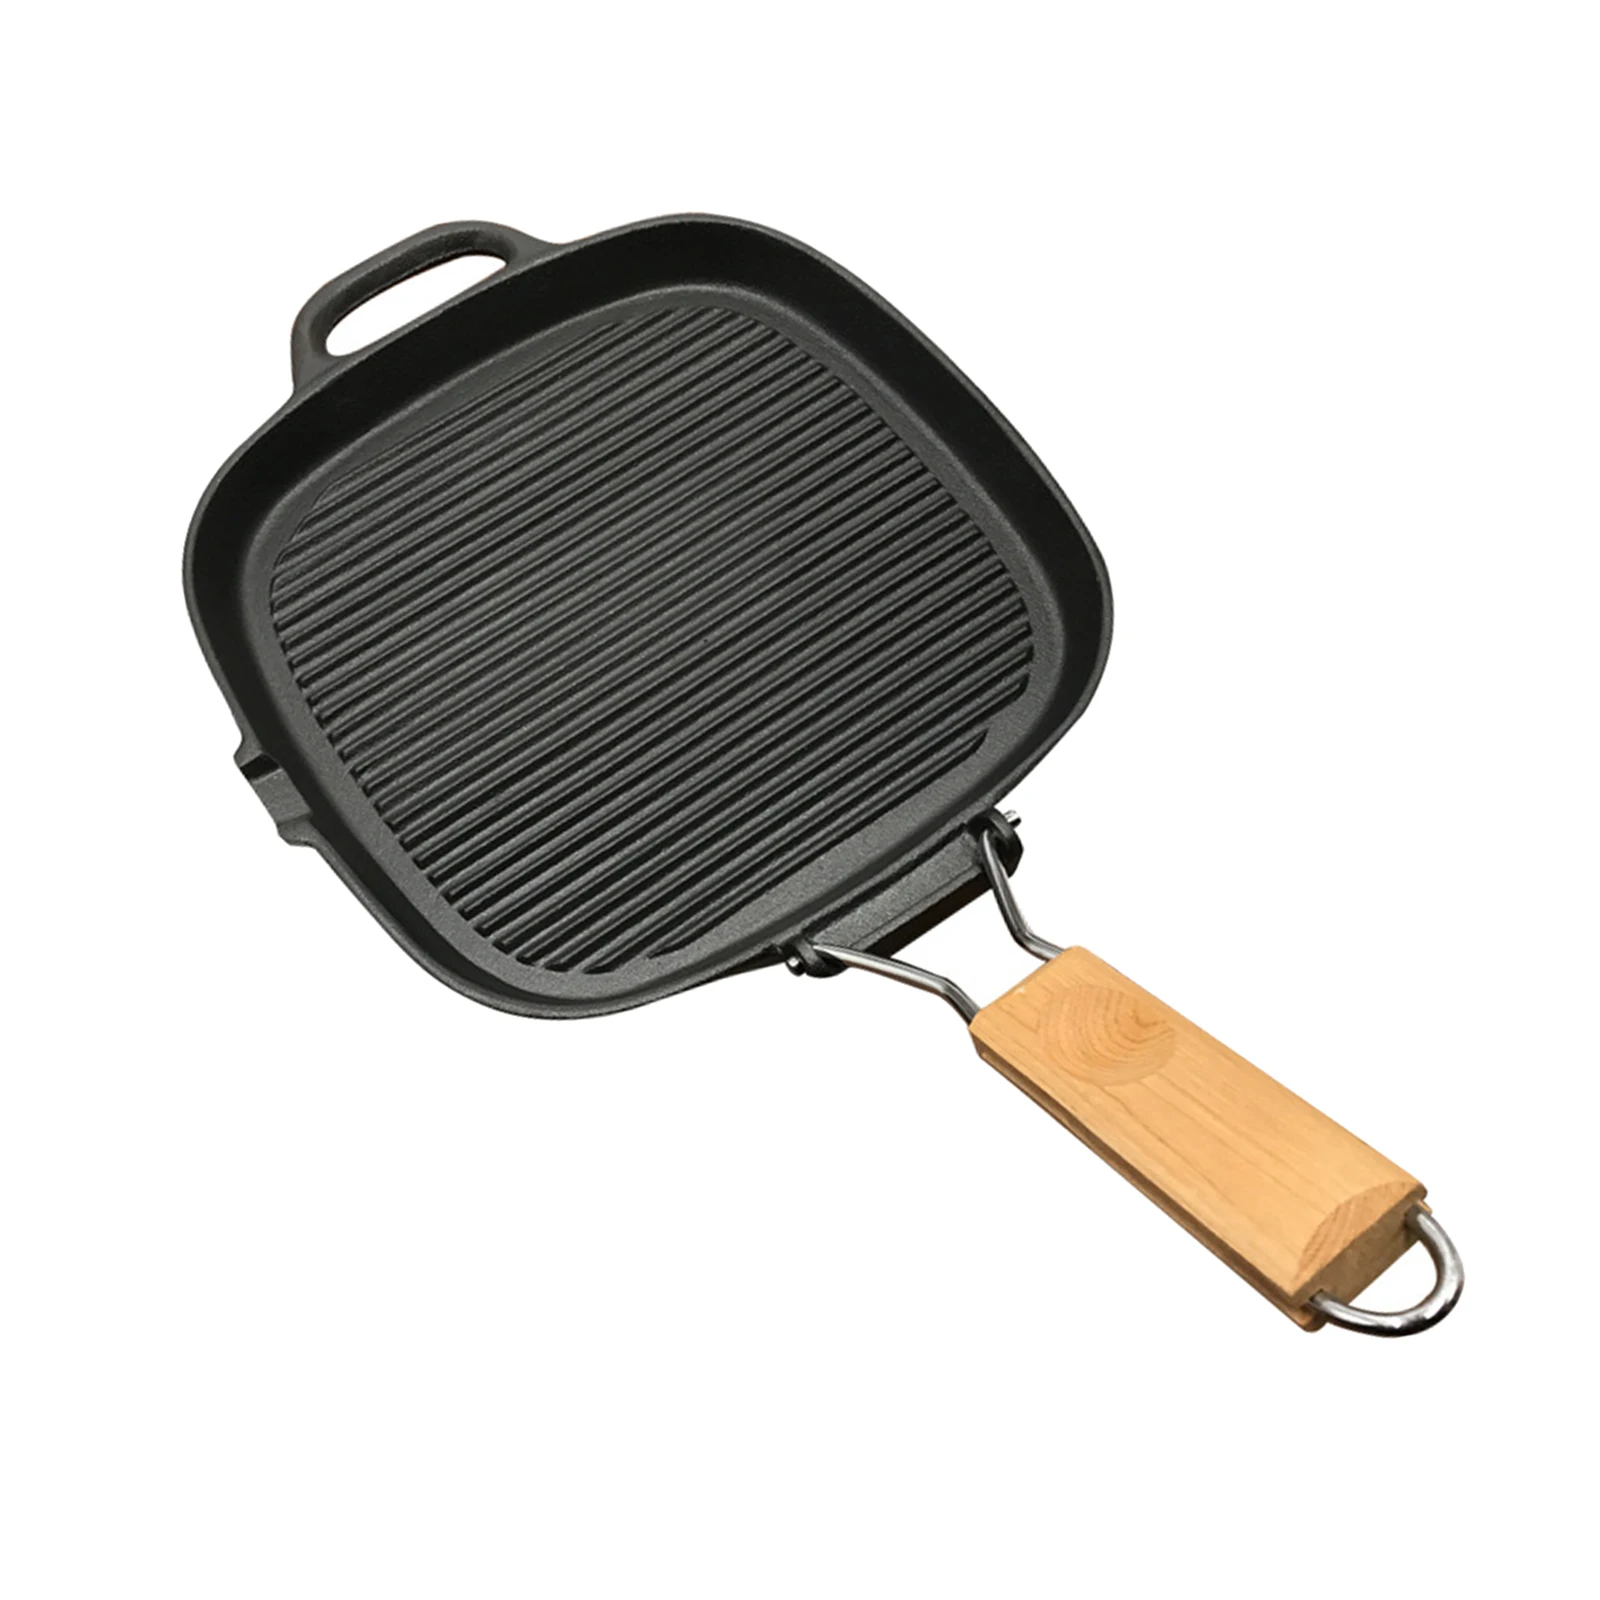 FOLDABLE IRON NON STICK FRY PAN GRIDDLE GRILL STEAK FRYING COOK BBQ KITCHEN PAN 